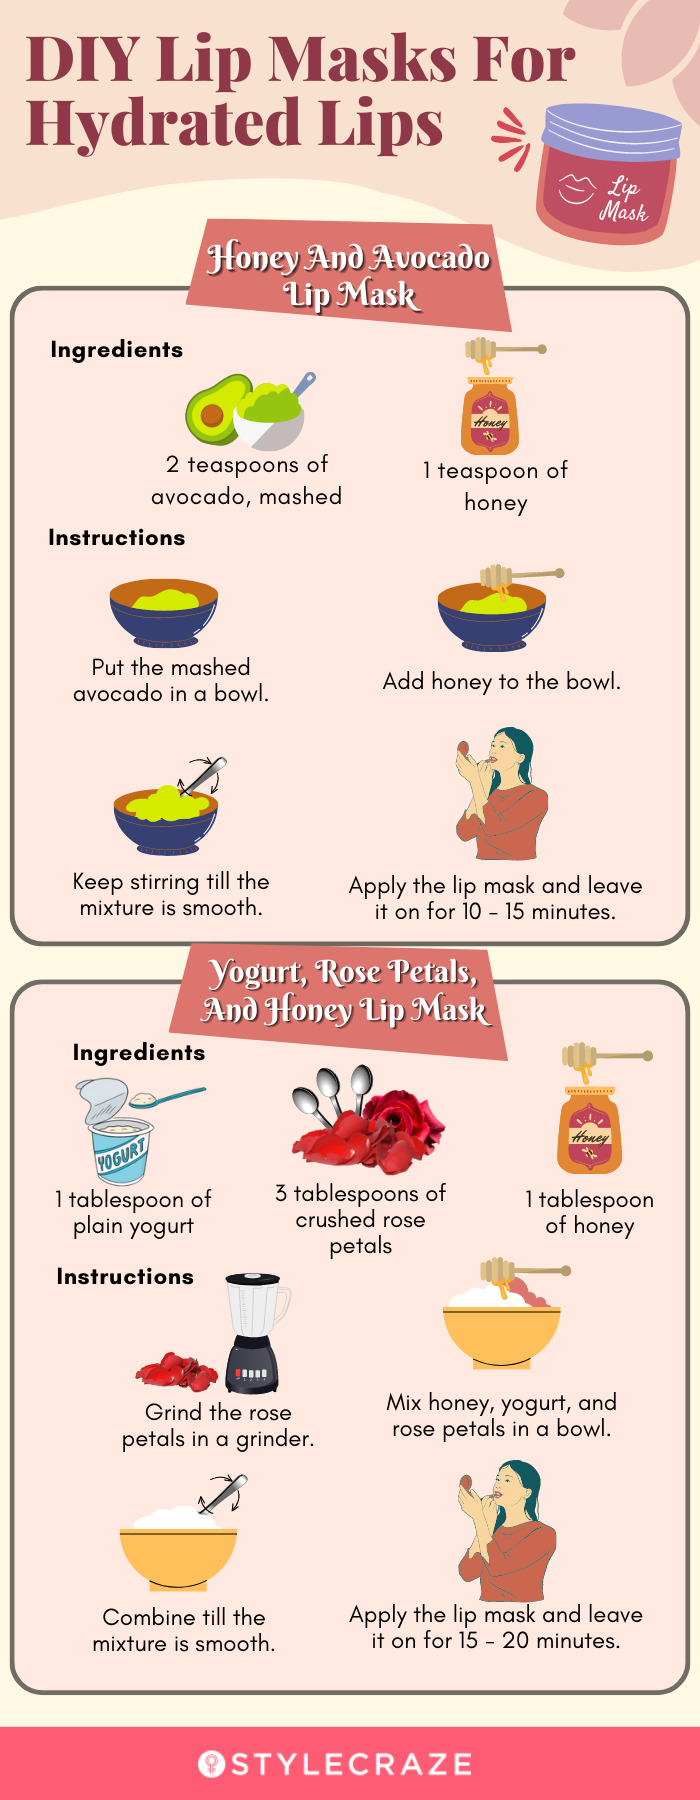 diy lip masks for hydrated lips (infographic)